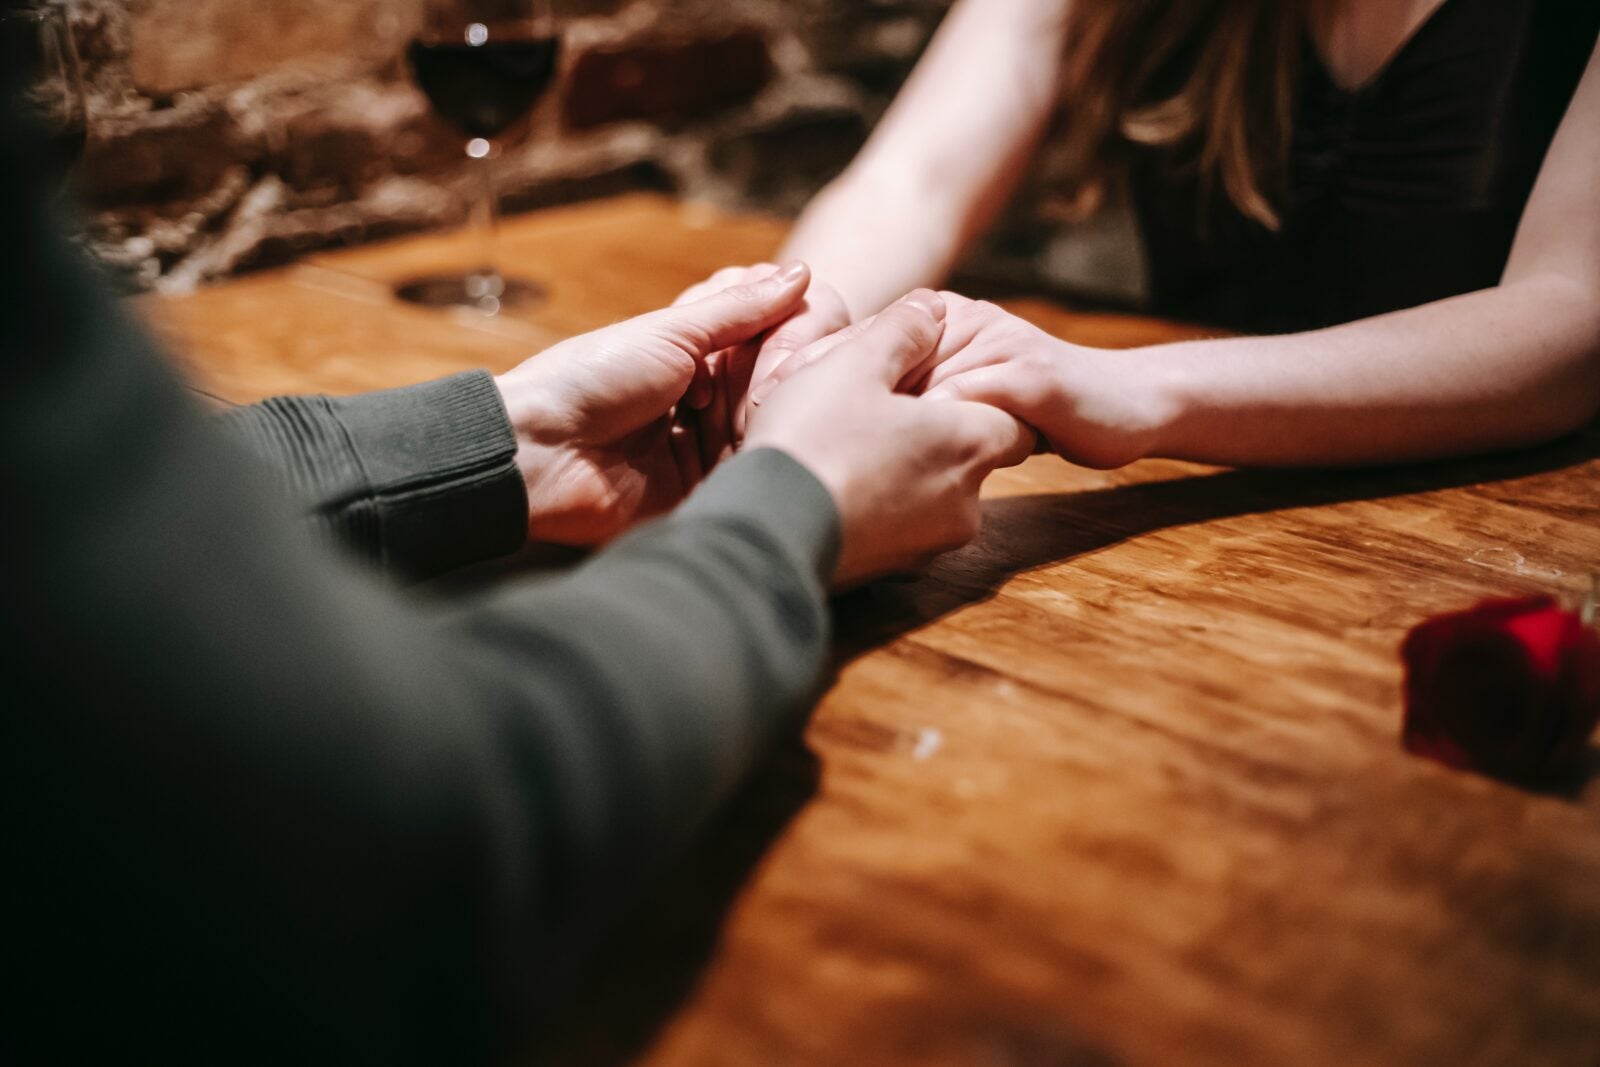 A couple holding hands while sitting at a table.